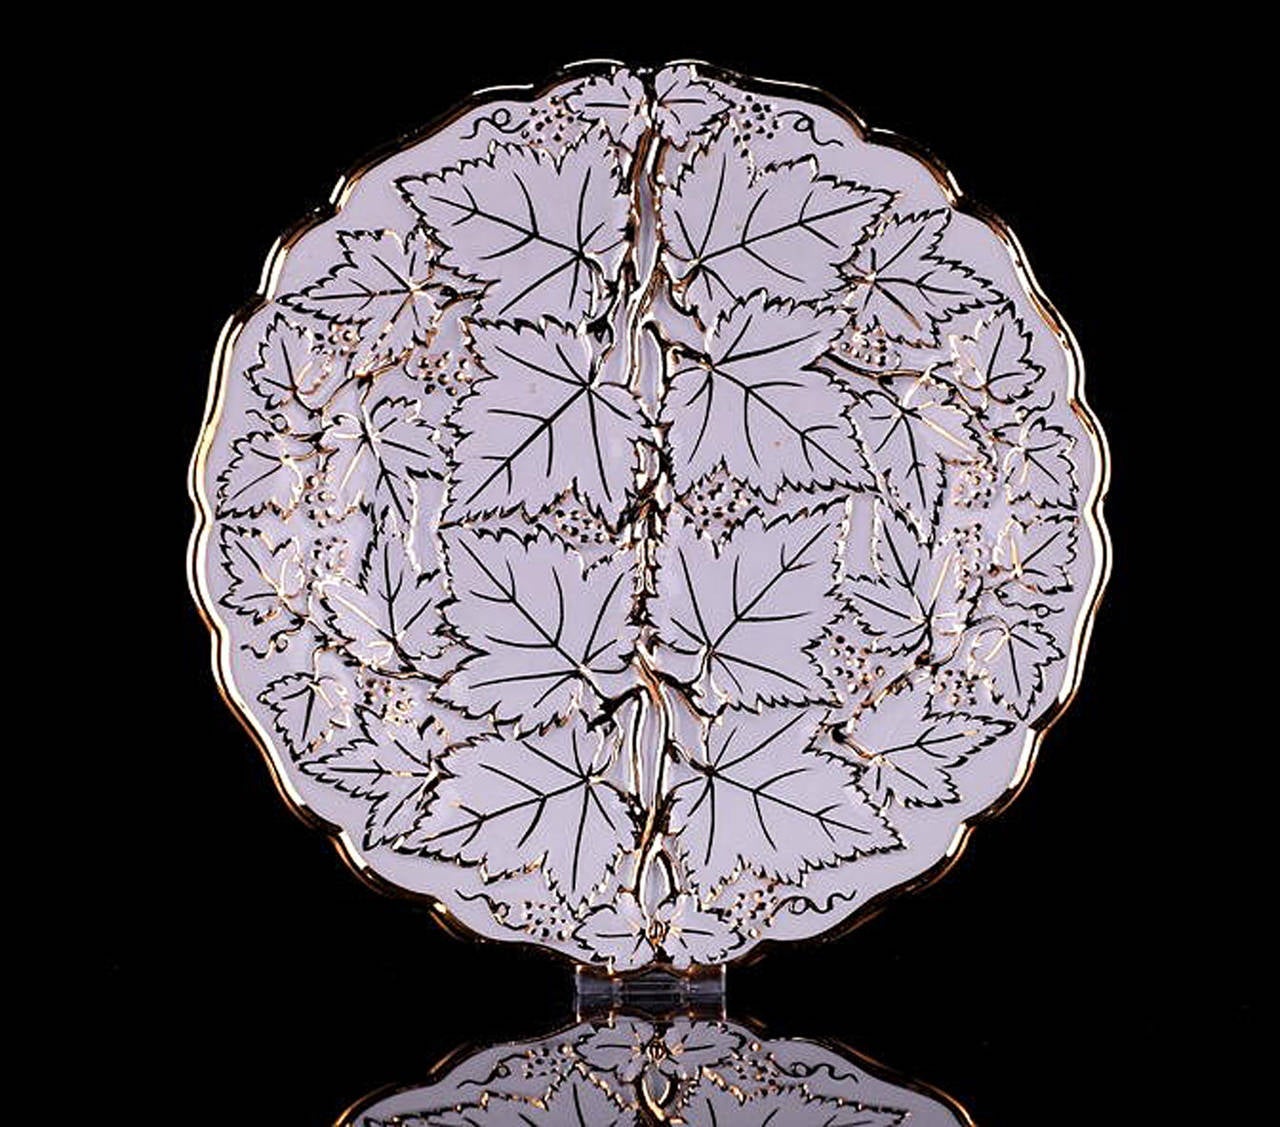 Meissen about 1880-1890.
Porcelain platter, designed in the form of leaves, made of white gilded porcelain.
Excelent showcases piece, never used.
Dimensions: Height: 3cm / Diameter: 26cm
Condition: very good, no cracks, damage - see